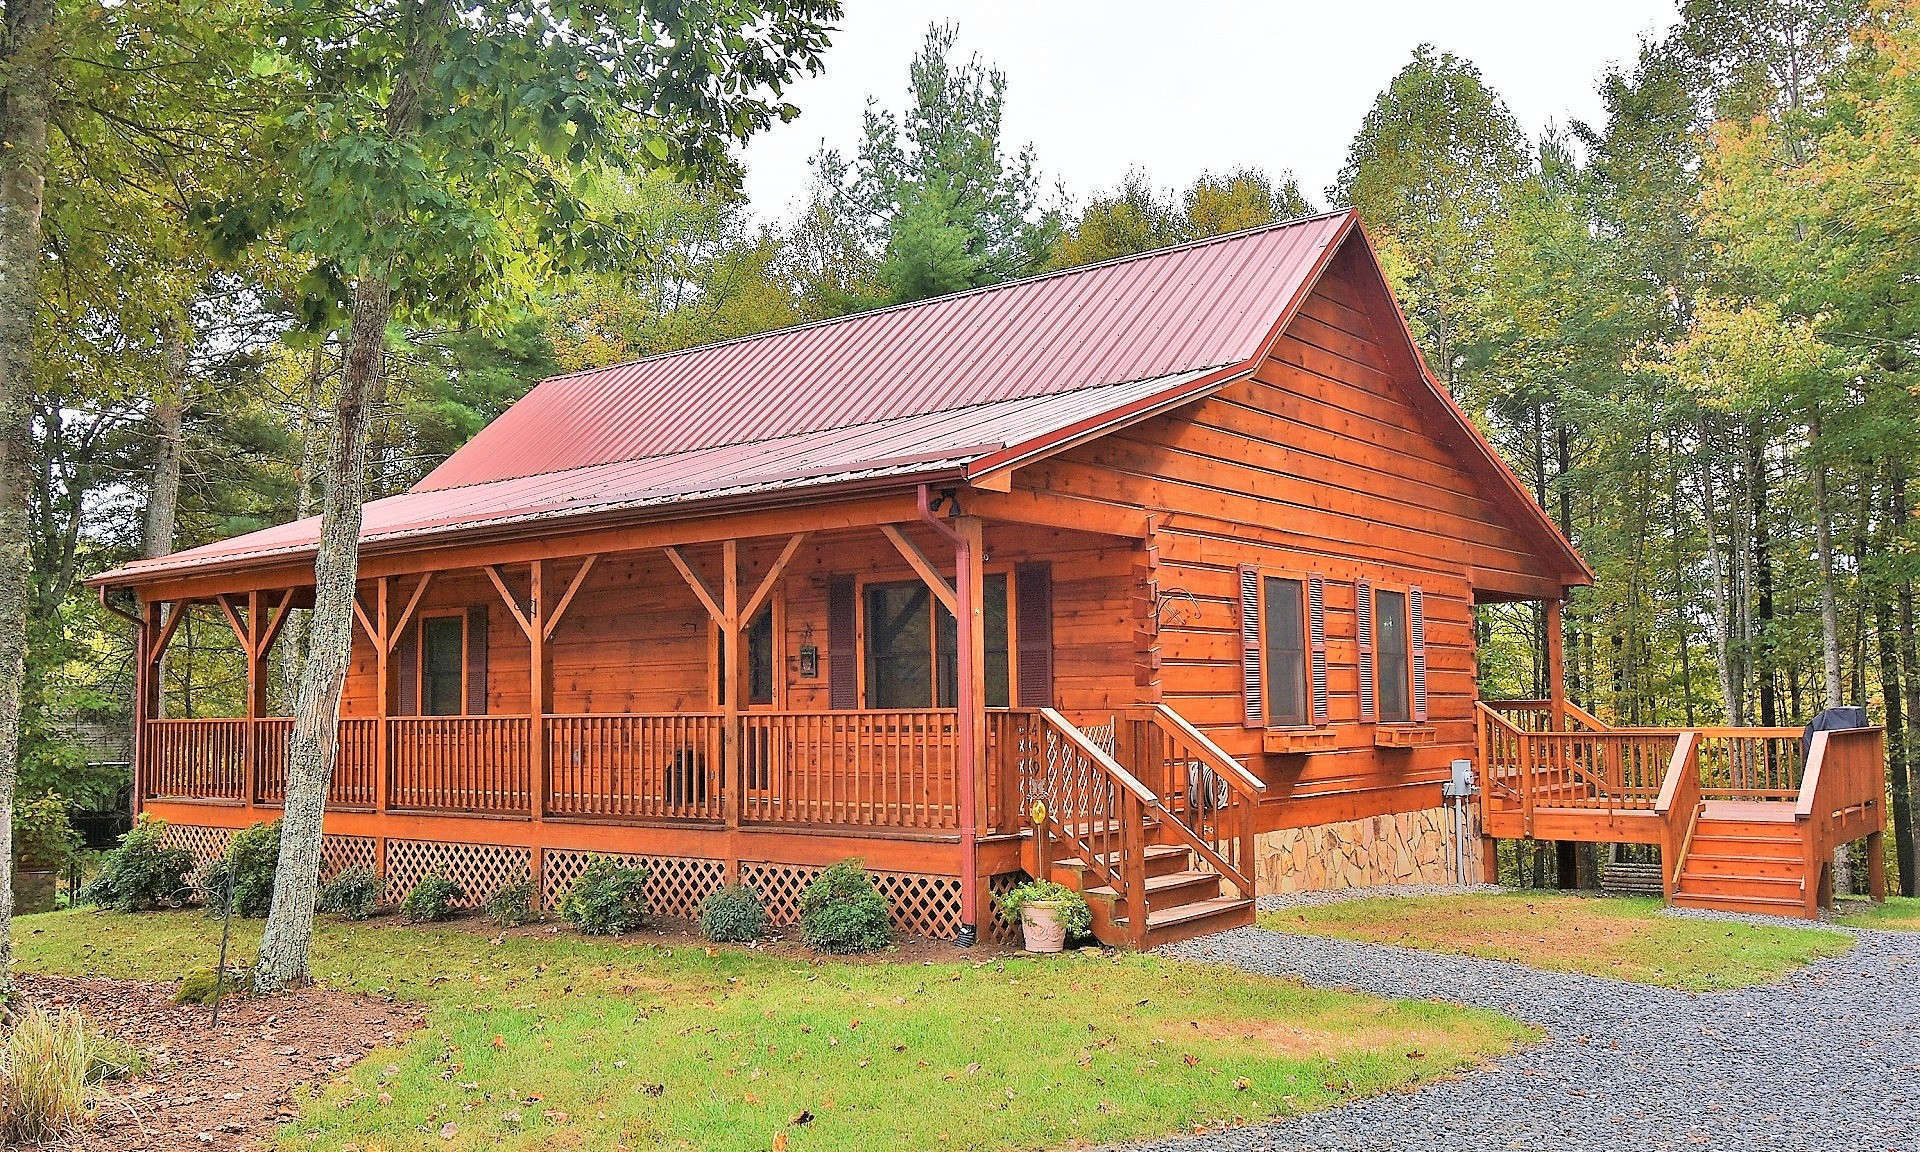 ESCAPE TO THE COOLEST CORNER OF NC! Resting on a 1.58 acre setting surrounded by woodlands in Painted Laurel, a well established community in the Jefferson area of Ashe County, this immaculate 2-bedroom, 2-bath log cabin is the ideal choice for your NC High Country mountain cabin.